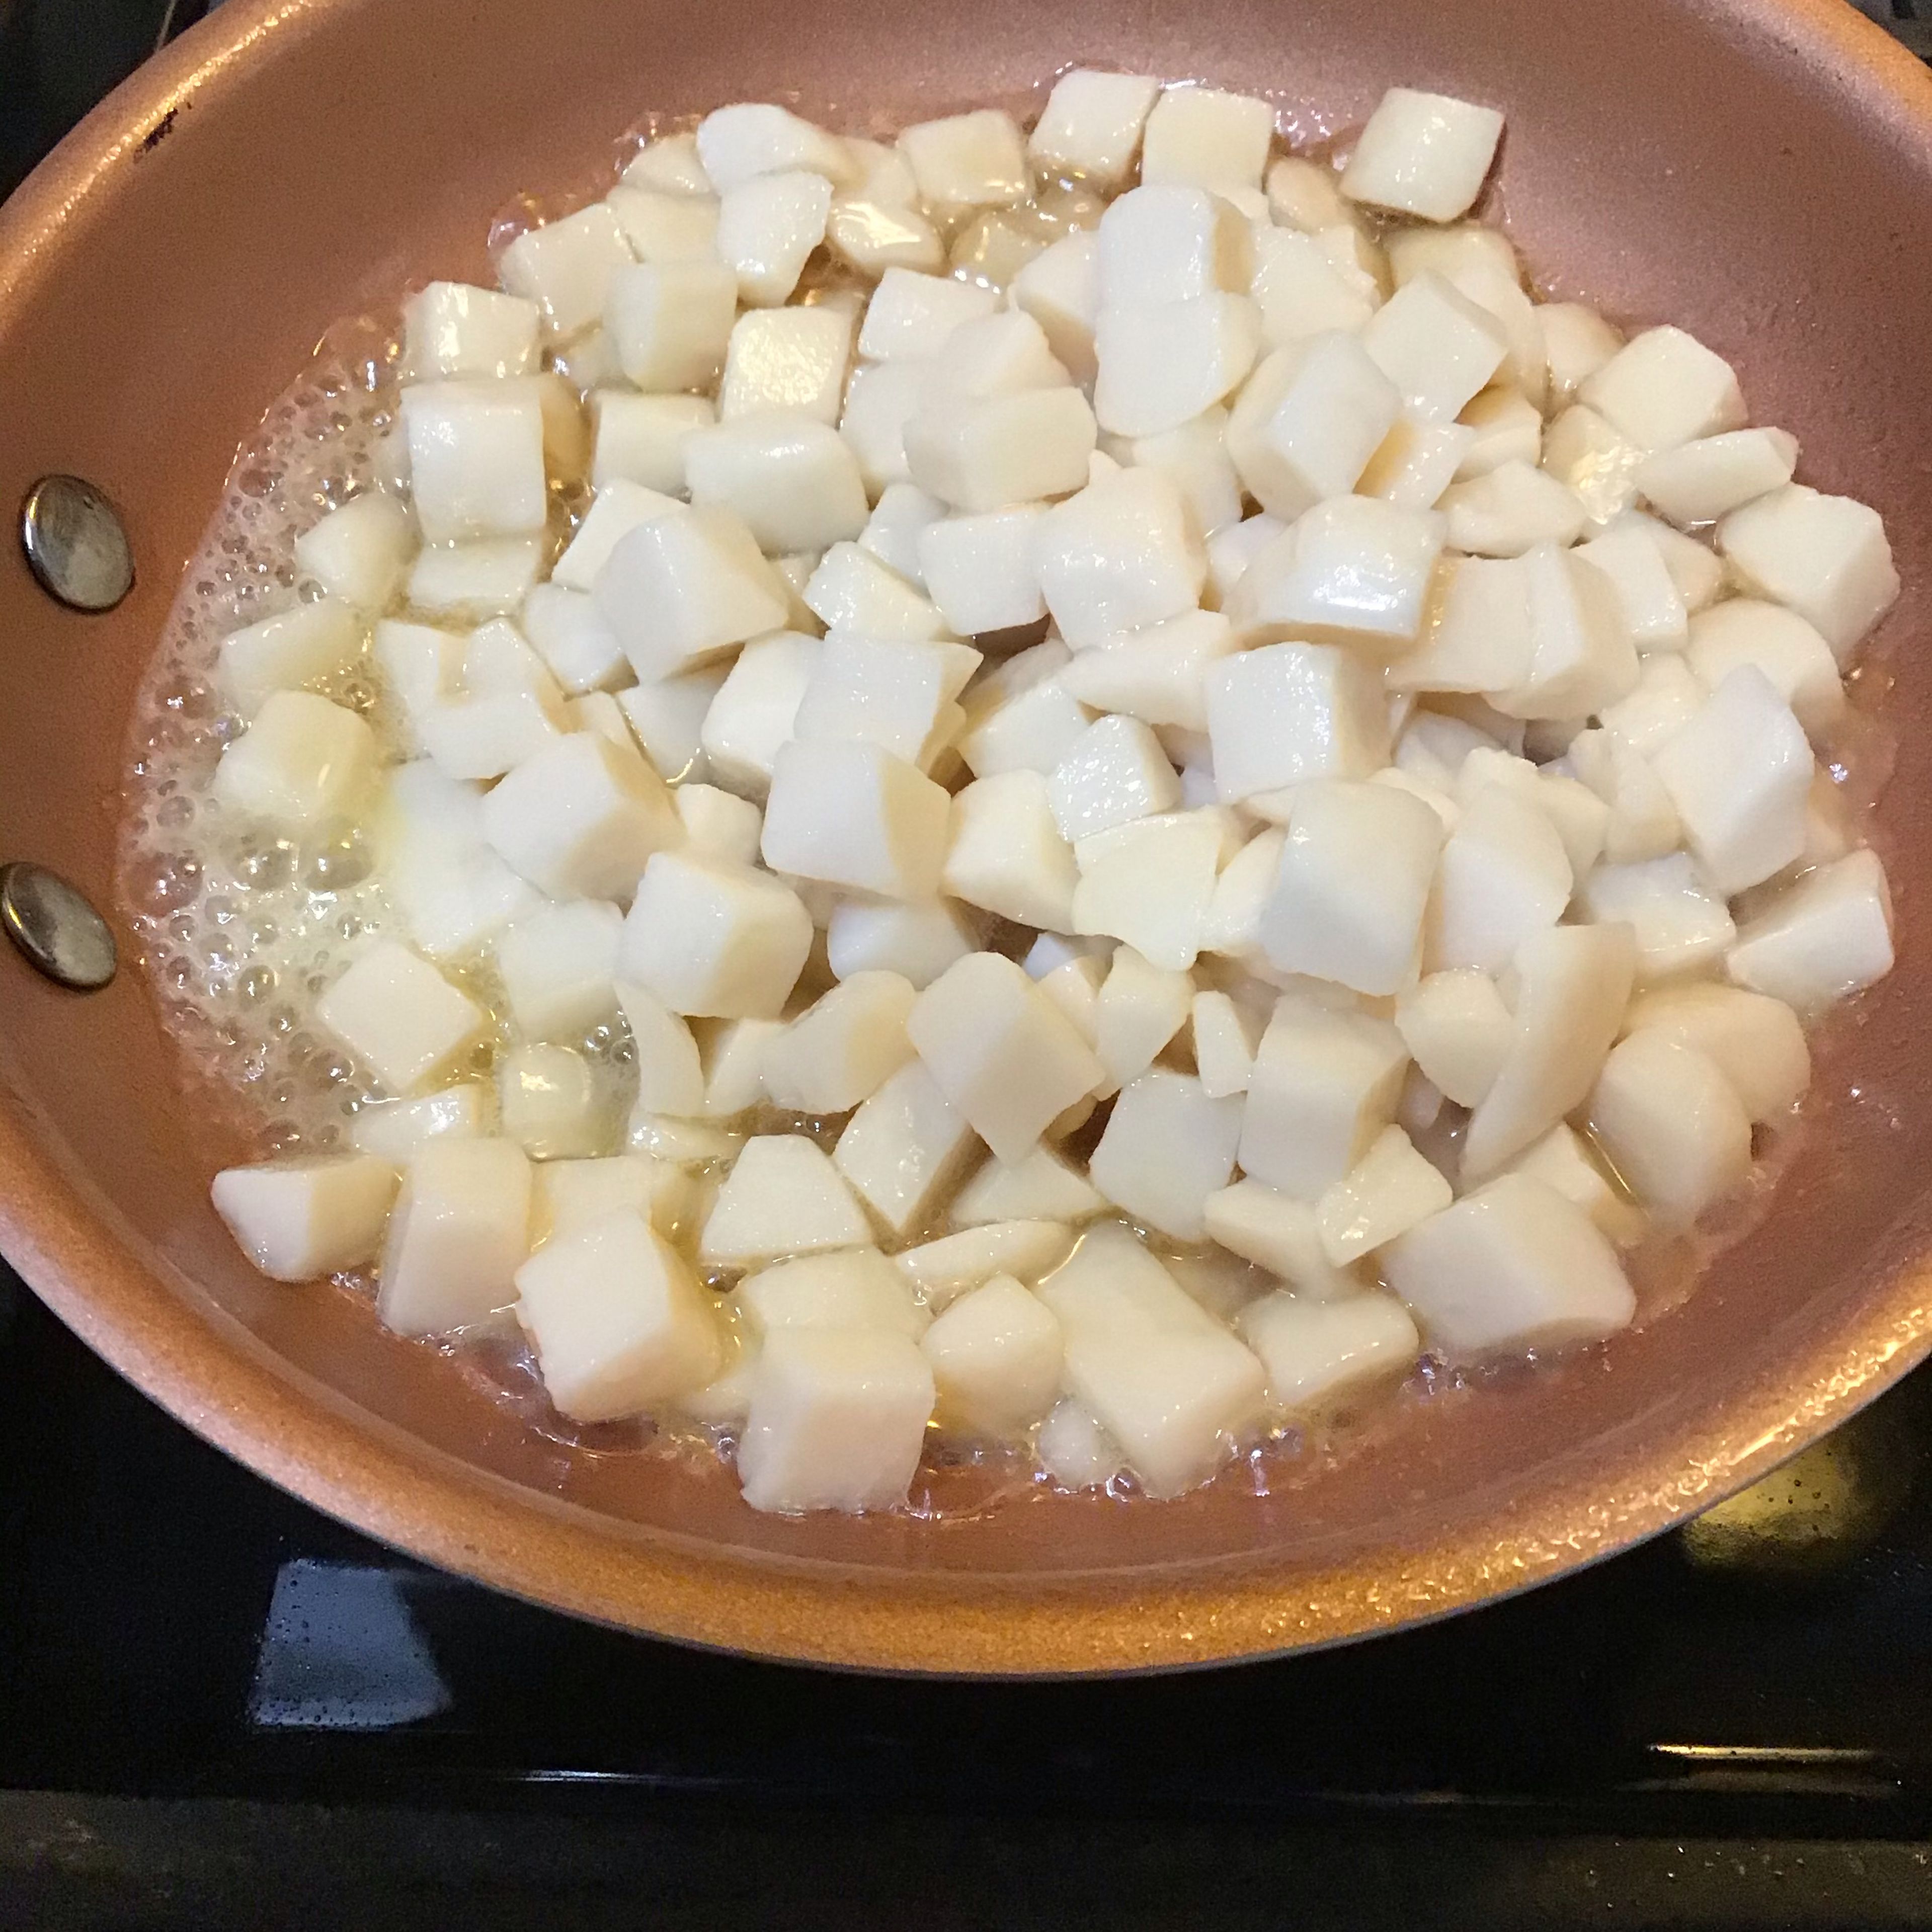 Add dices potatoes, 1 can. If you use fresh potatoes make sure to boil cubed potatoes until soften then put in frying pan.